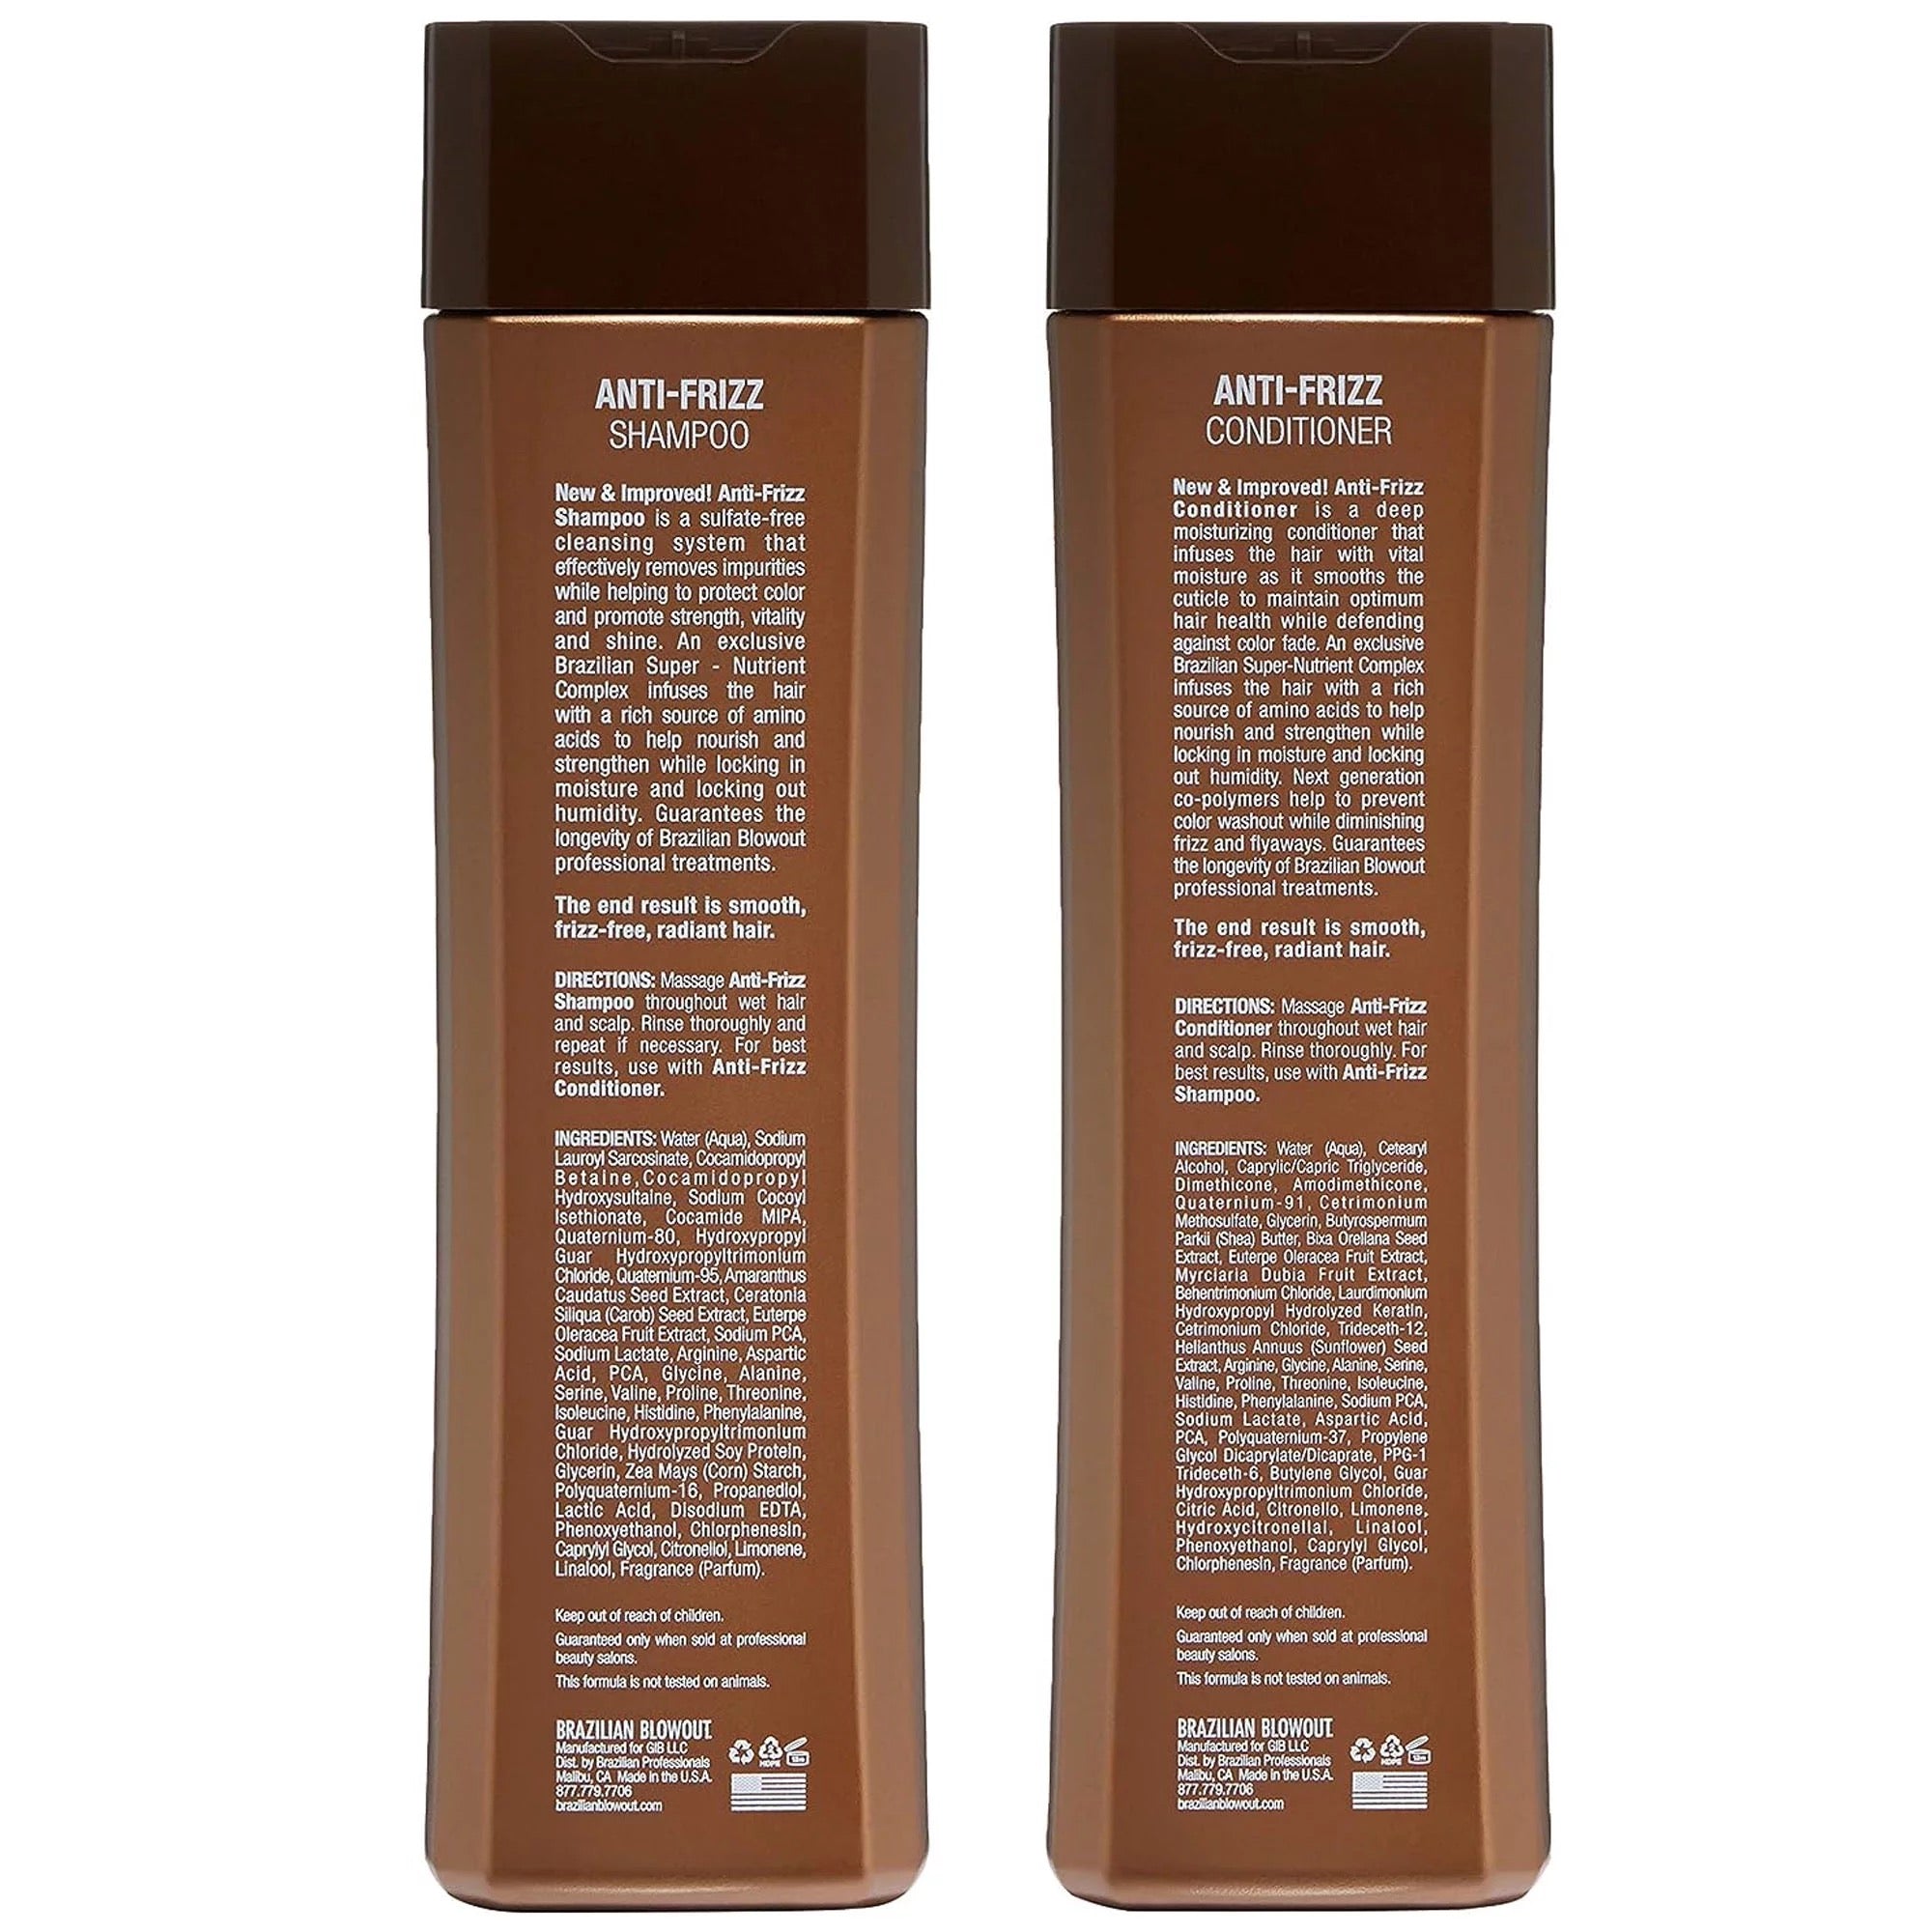 Two brown bottles of sulfate-free, anti-frizz hair products: one Brazilian Blowout Anti-Frizz Shampoo and one Brazilian Blowout Anti-Frizz Conditioner. Both bottles boast white text descriptions and instructions on the back, promising the sleek results of a Brazilian Blowout.